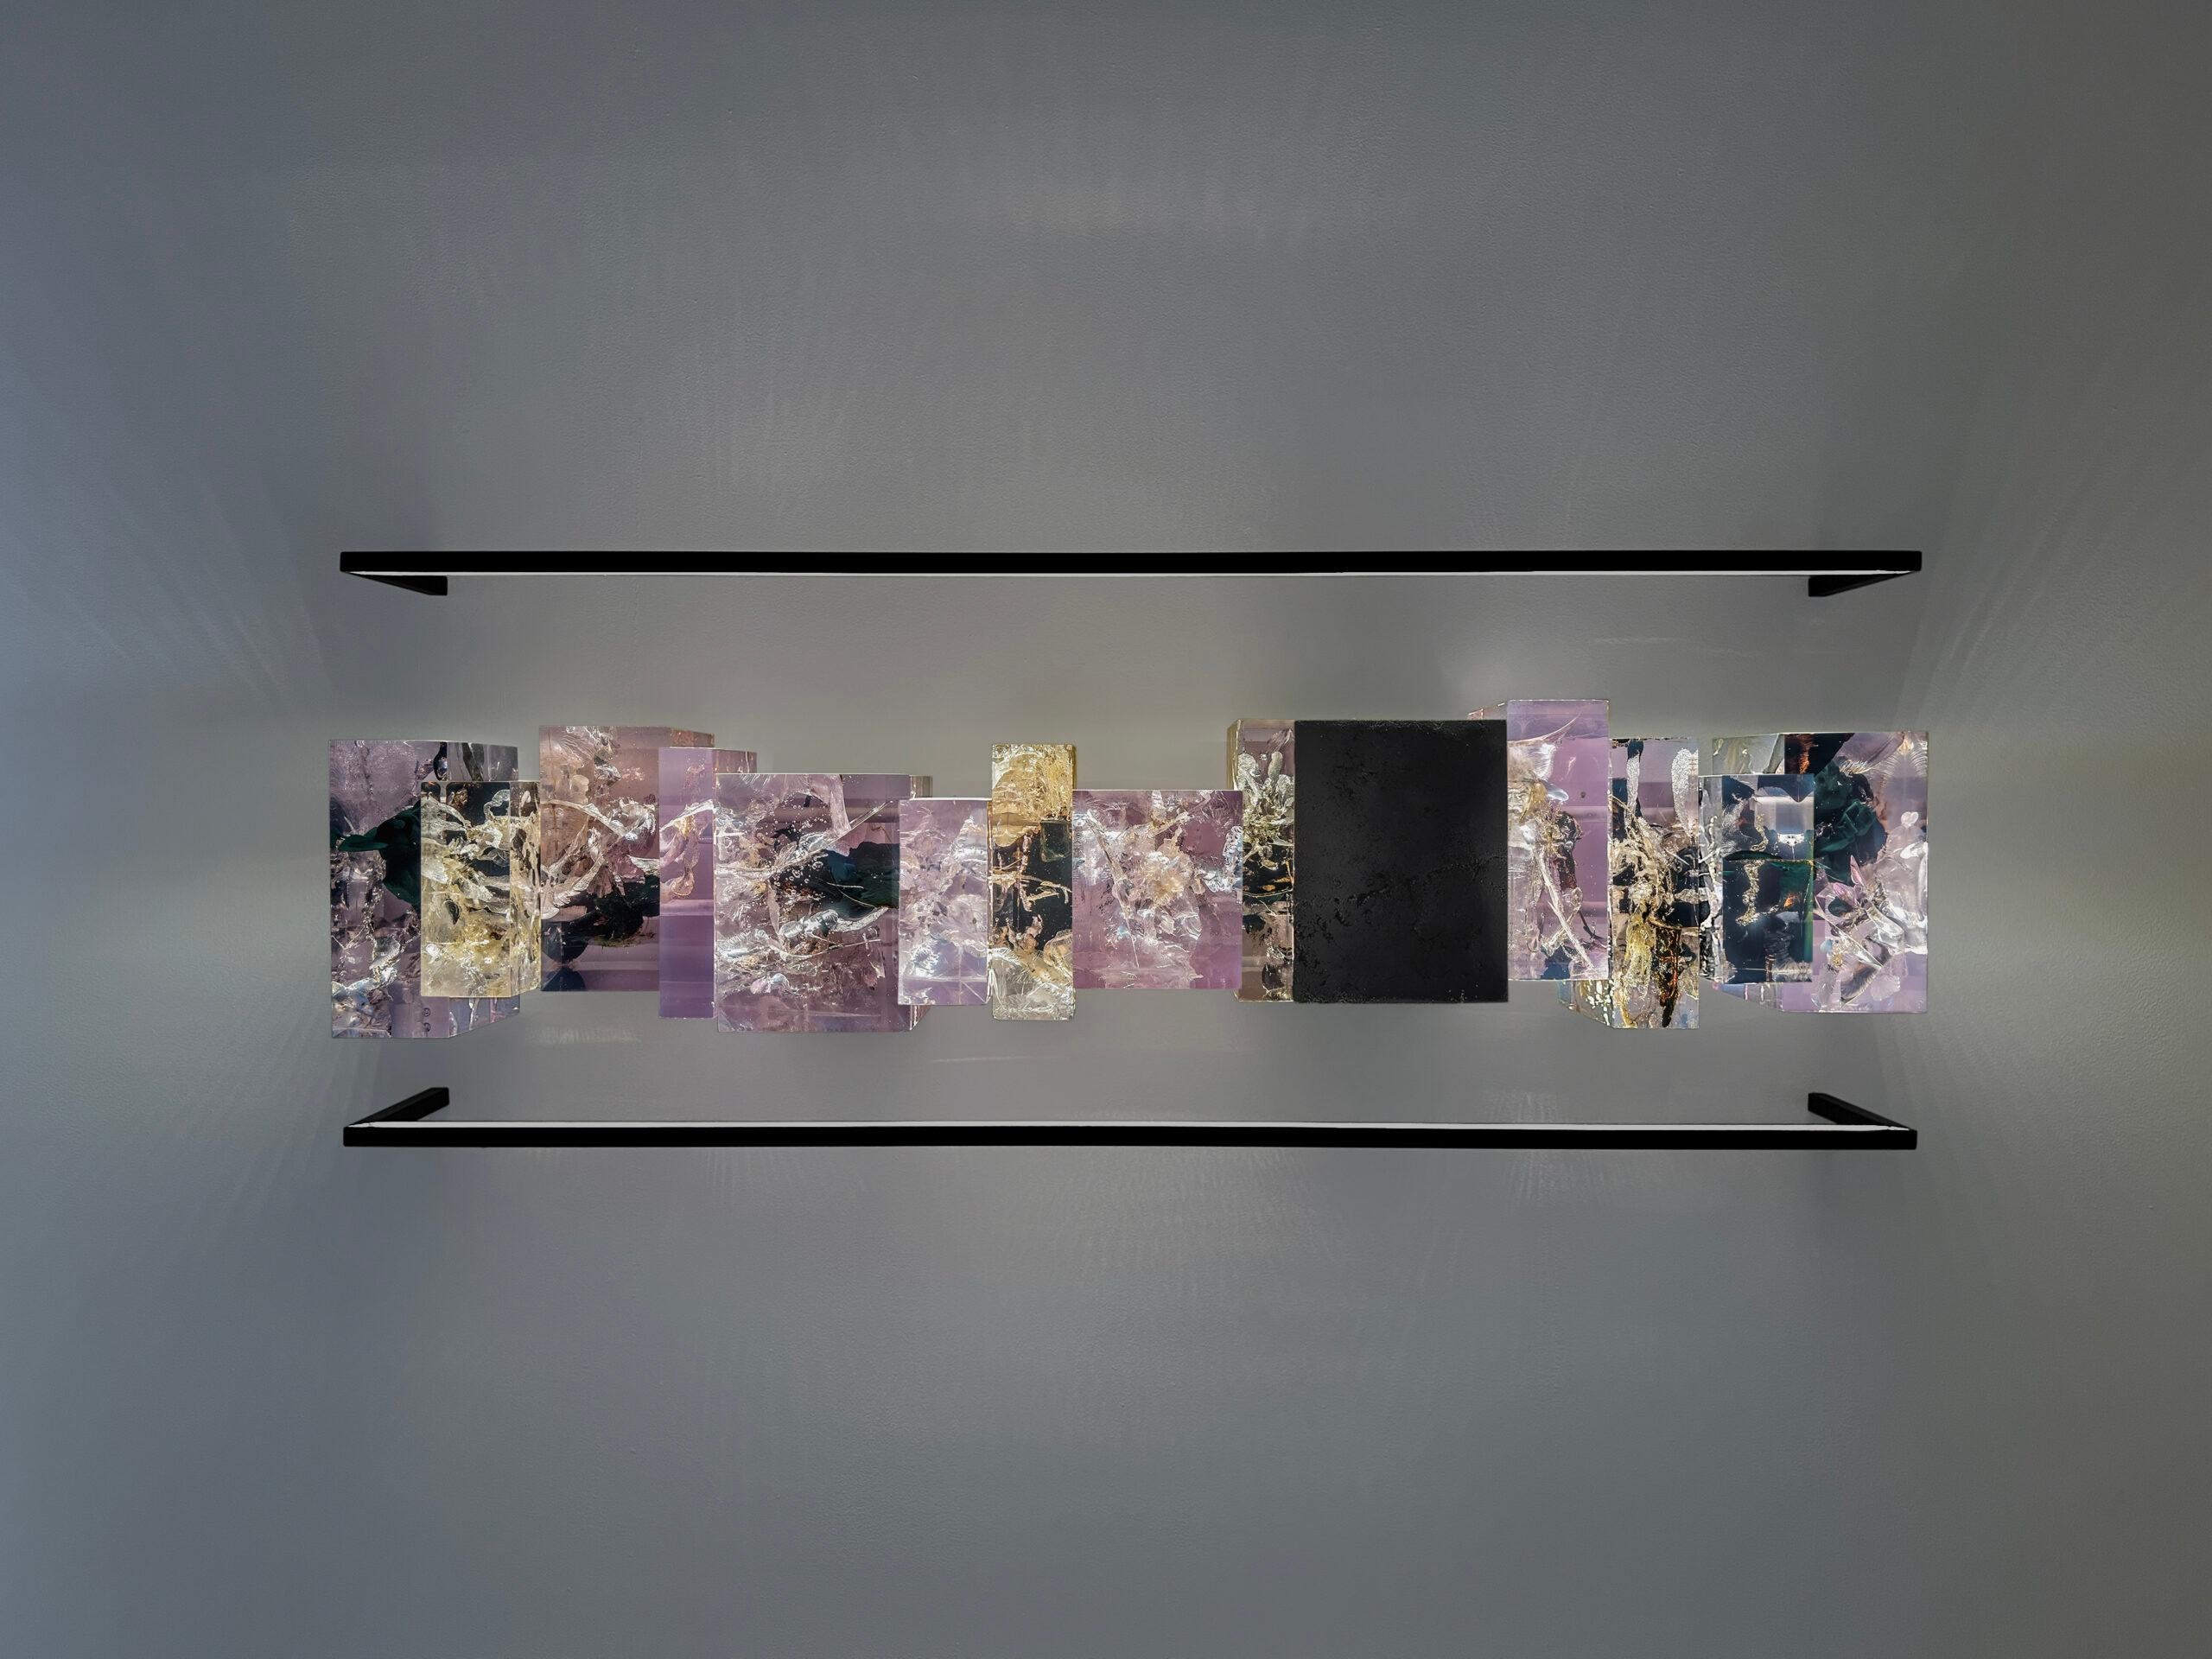 Synthesis A2 is a sculpture by contemporary artist Tom Price. This sculpture is made of resin, tar, patinated mild steel, stainless steel and LED, dimensions are 42 × 109 × 21 cm (16.5 × 42.9 × 8.3 in), including the light bars at top and bottom.